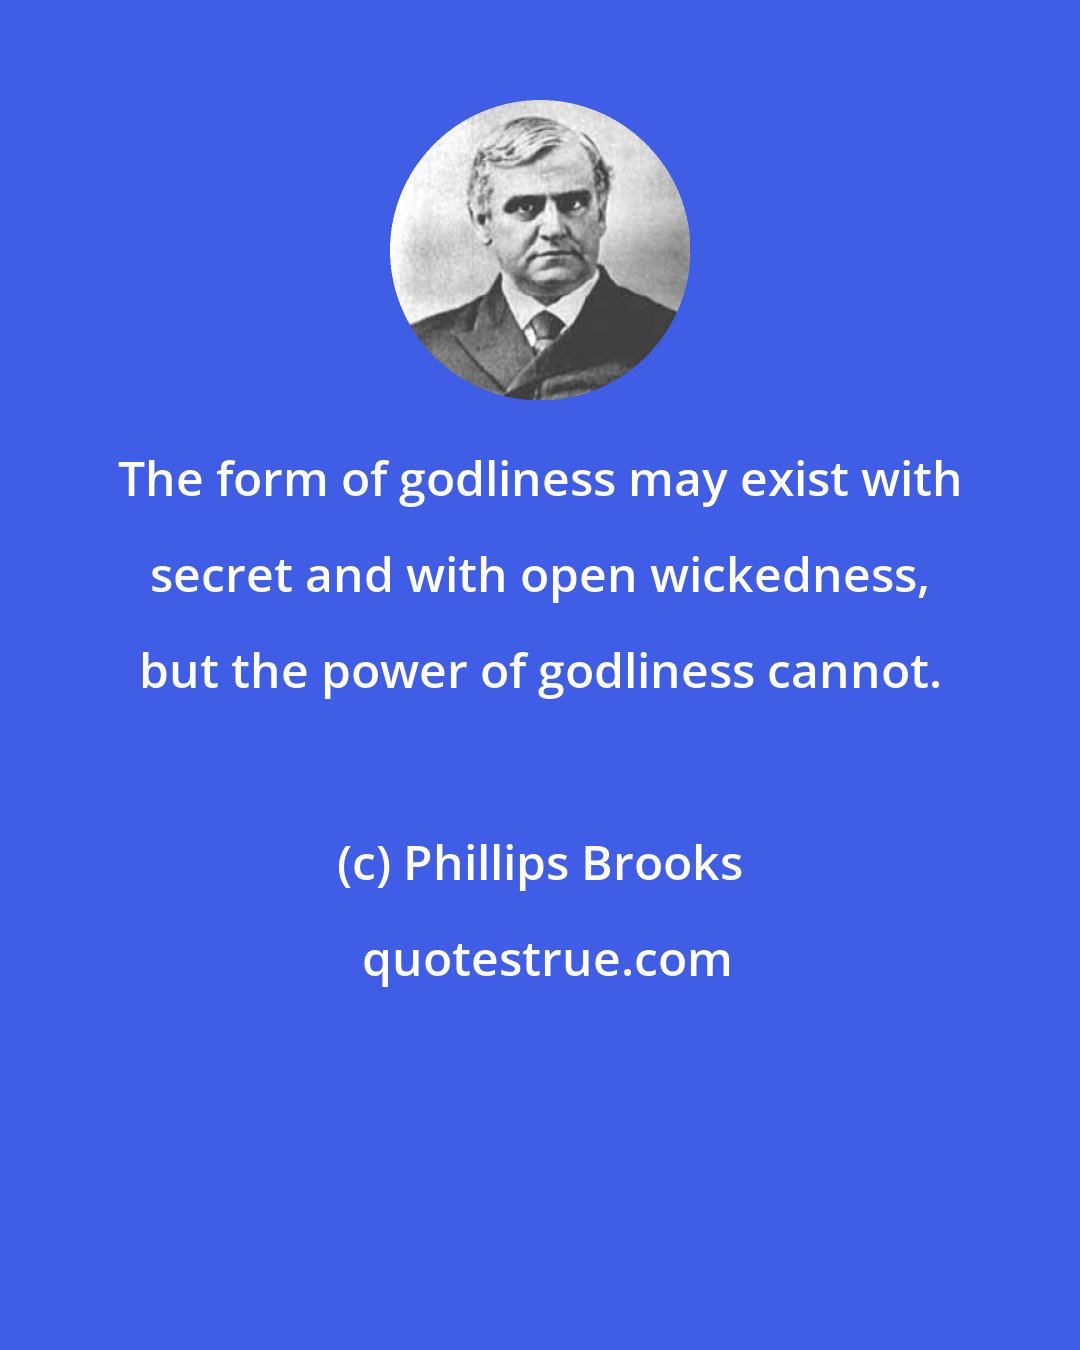 Phillips Brooks: The form of godliness may exist with secret and with open wickedness, but the power of godliness cannot.